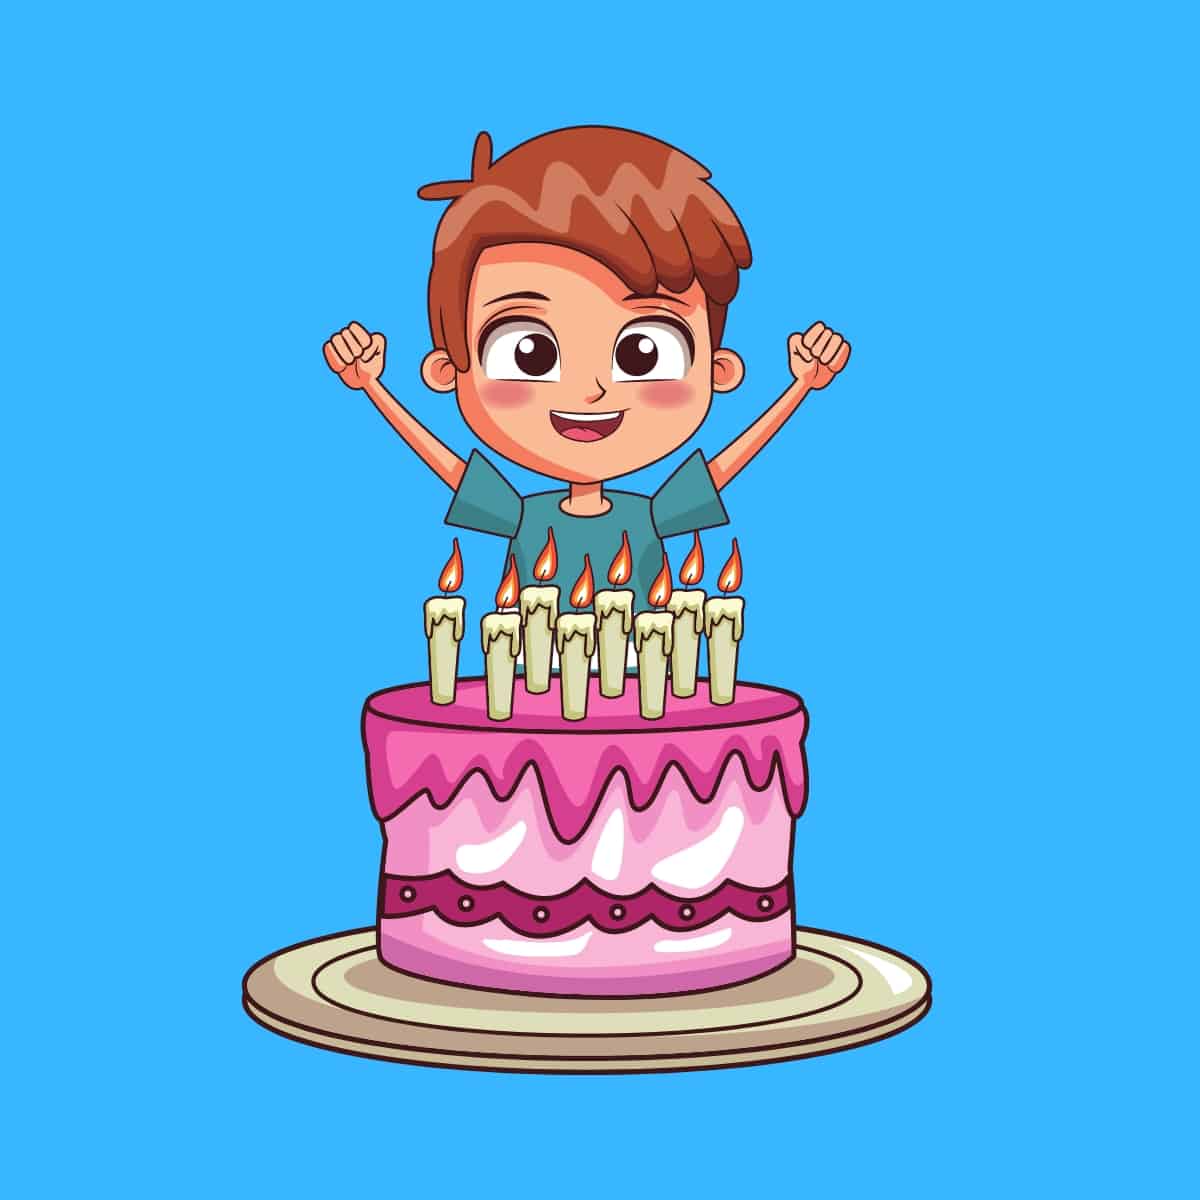 Cartoon graphic of a young boy with hands in the air about to blow out candles on his birthday cake on a blue background.